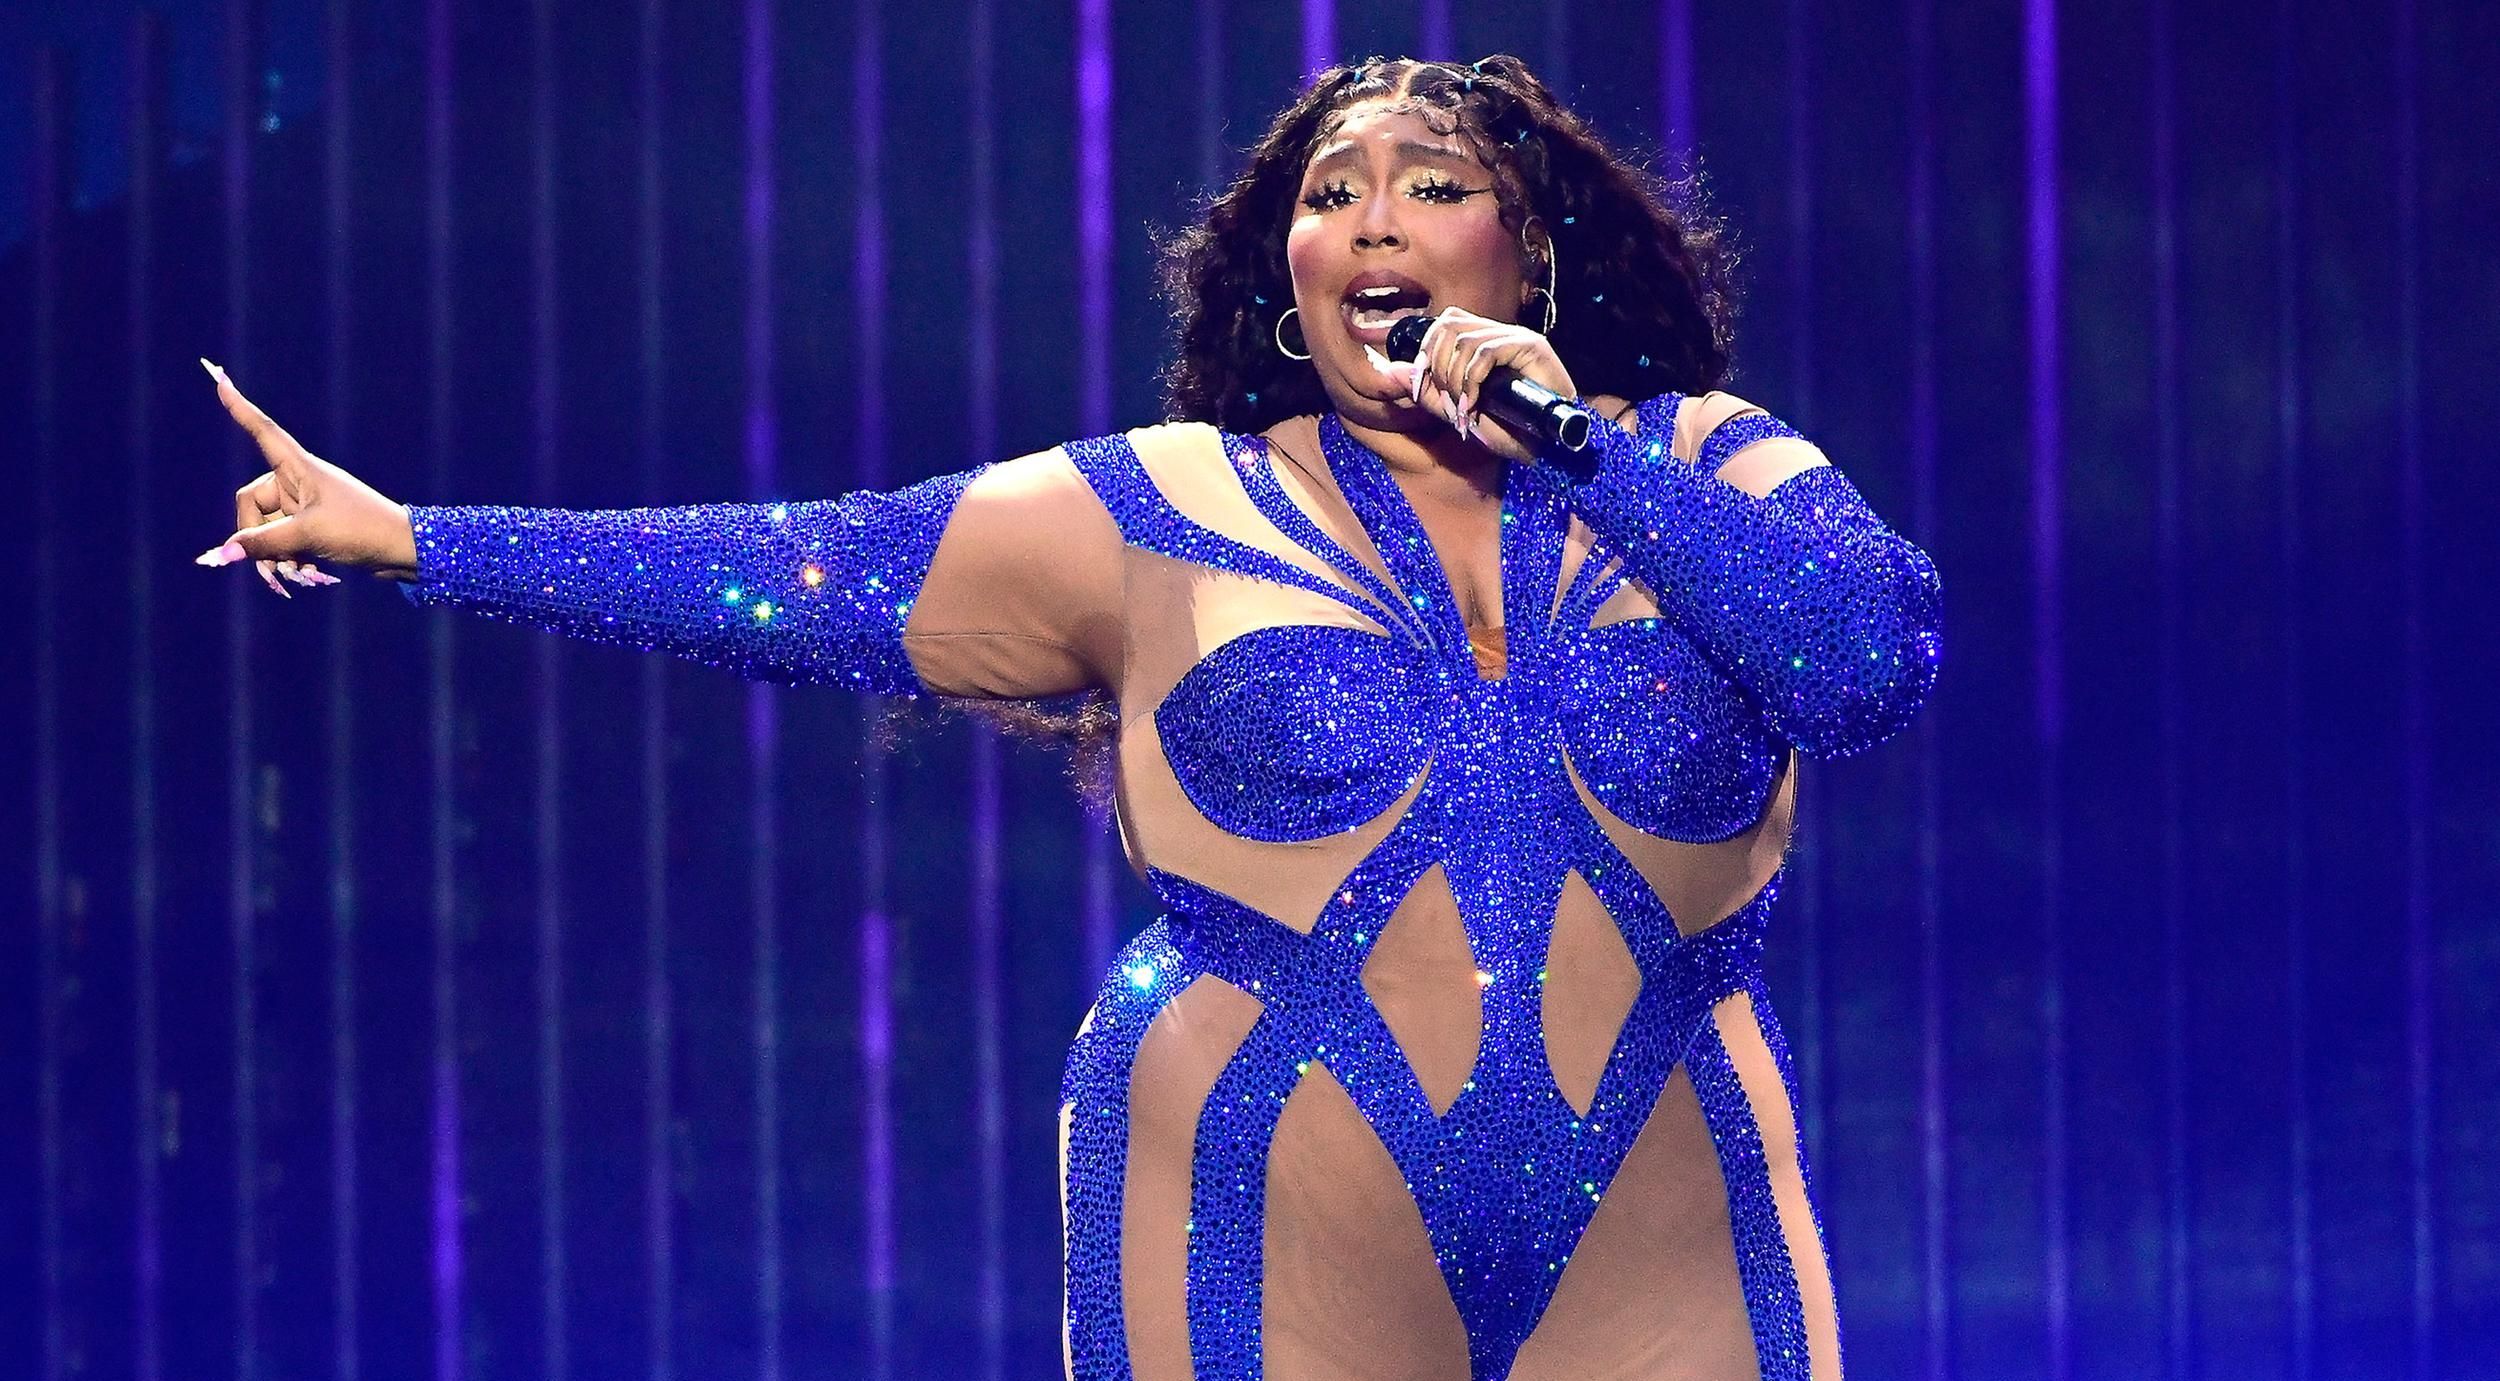 Lizzo Lawsuit: Singer Says Dancers’ Harassment Claims Are False